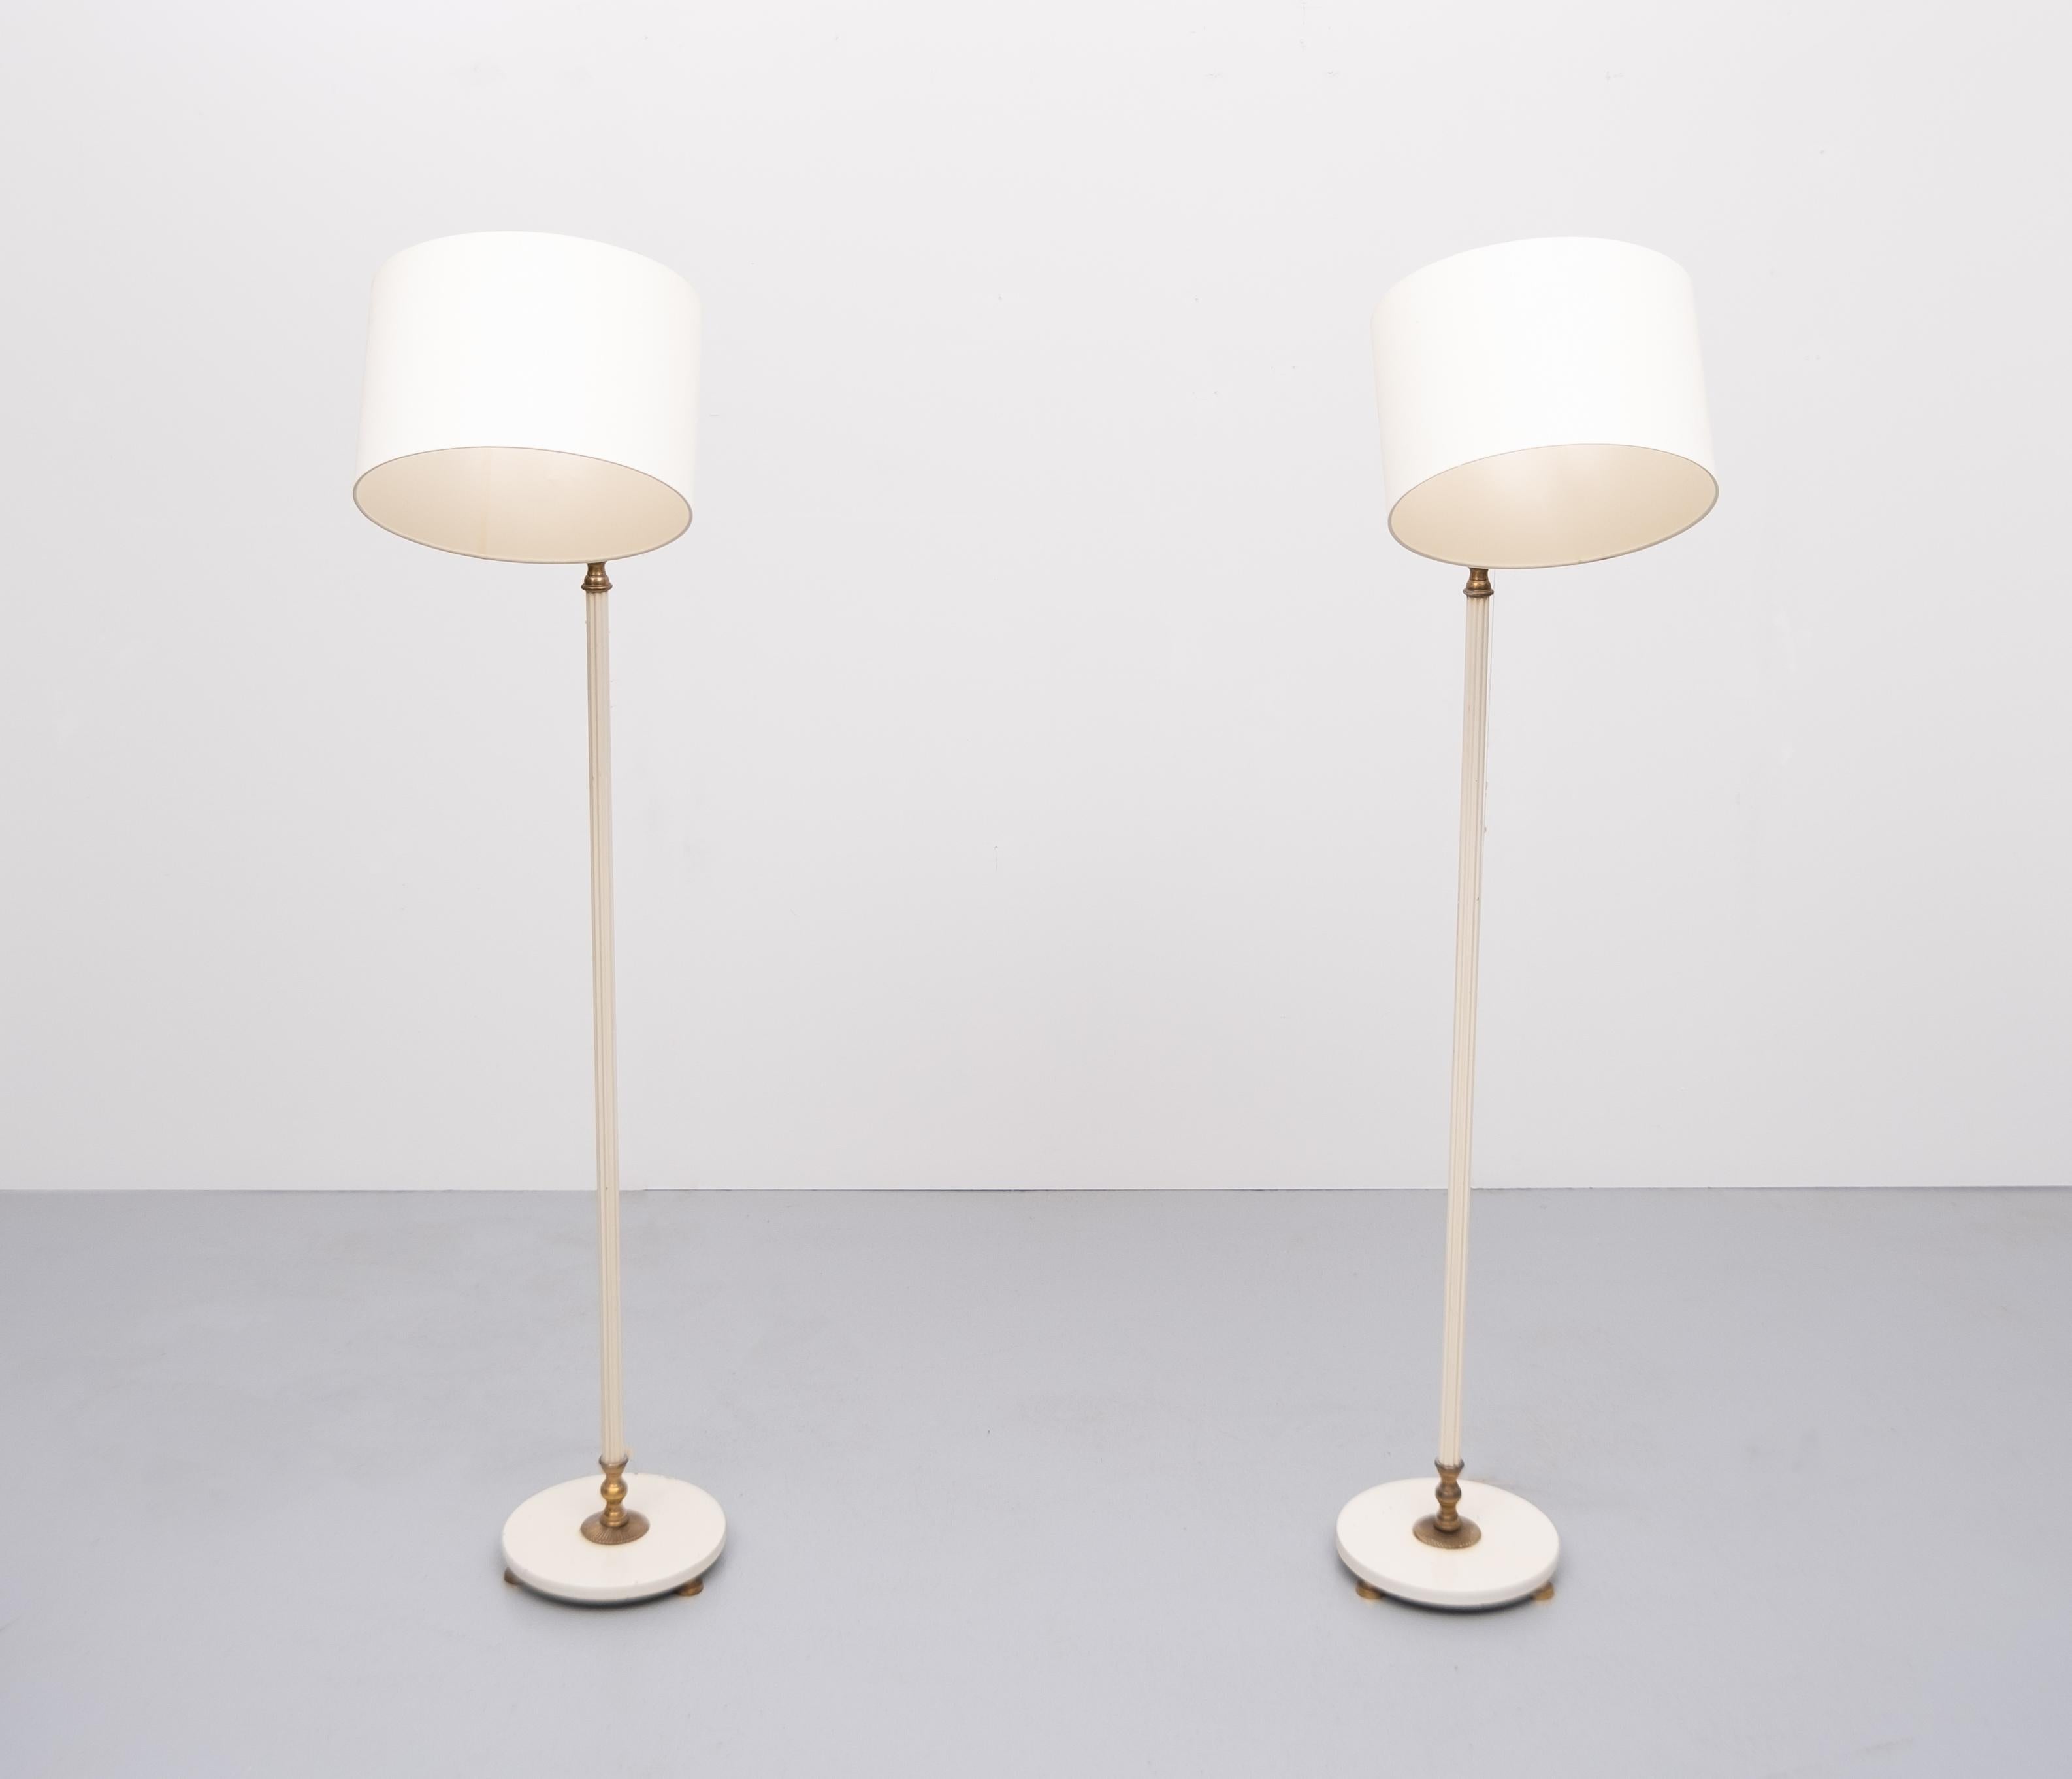 Mid-20th Century Floor Lamps, France, 1950s For Sale